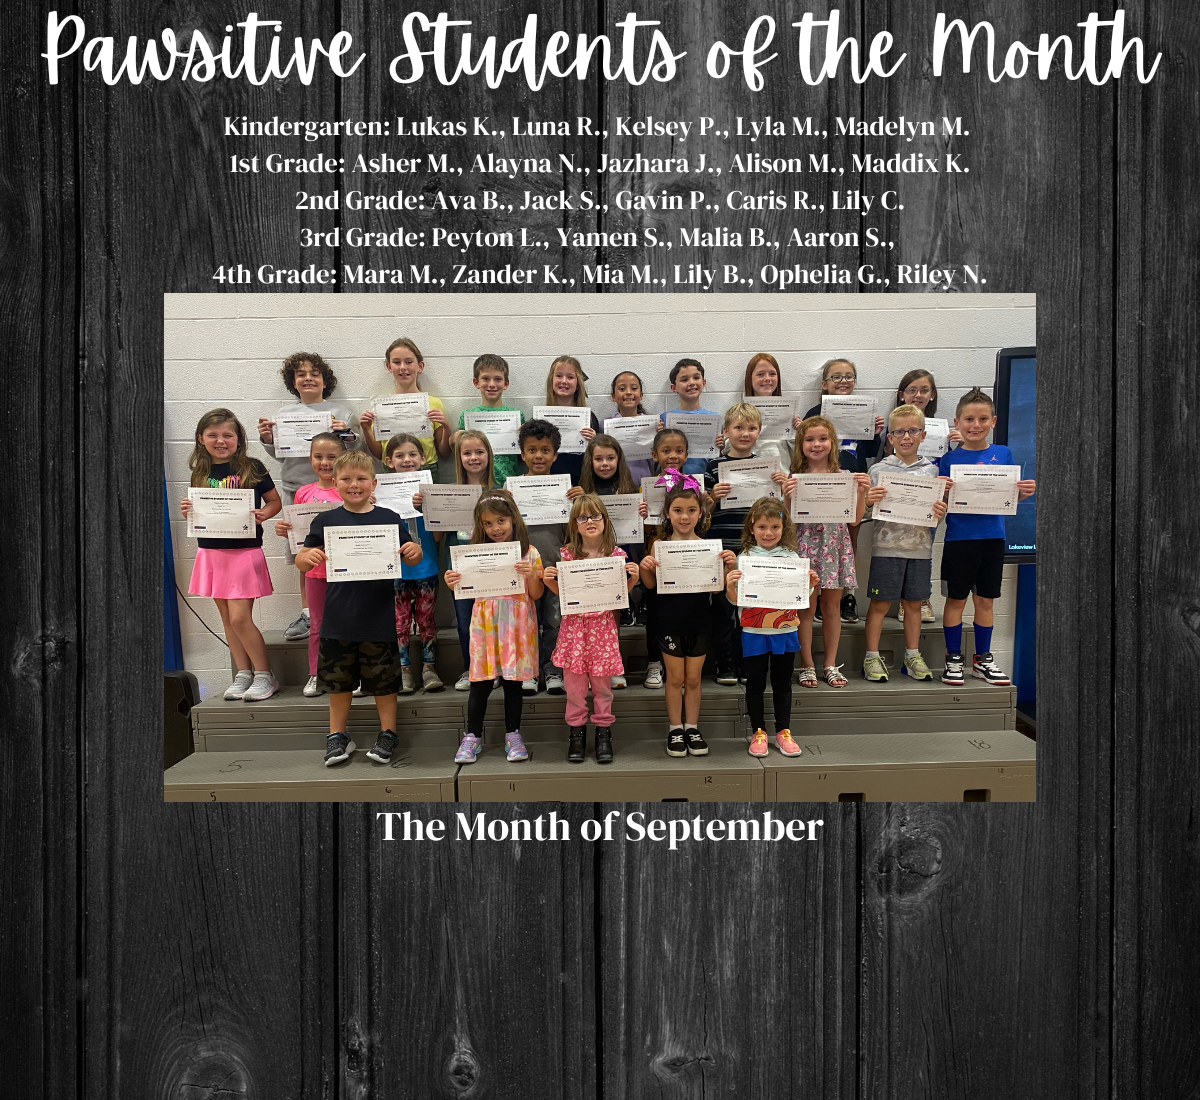 Pawsitive Students of September